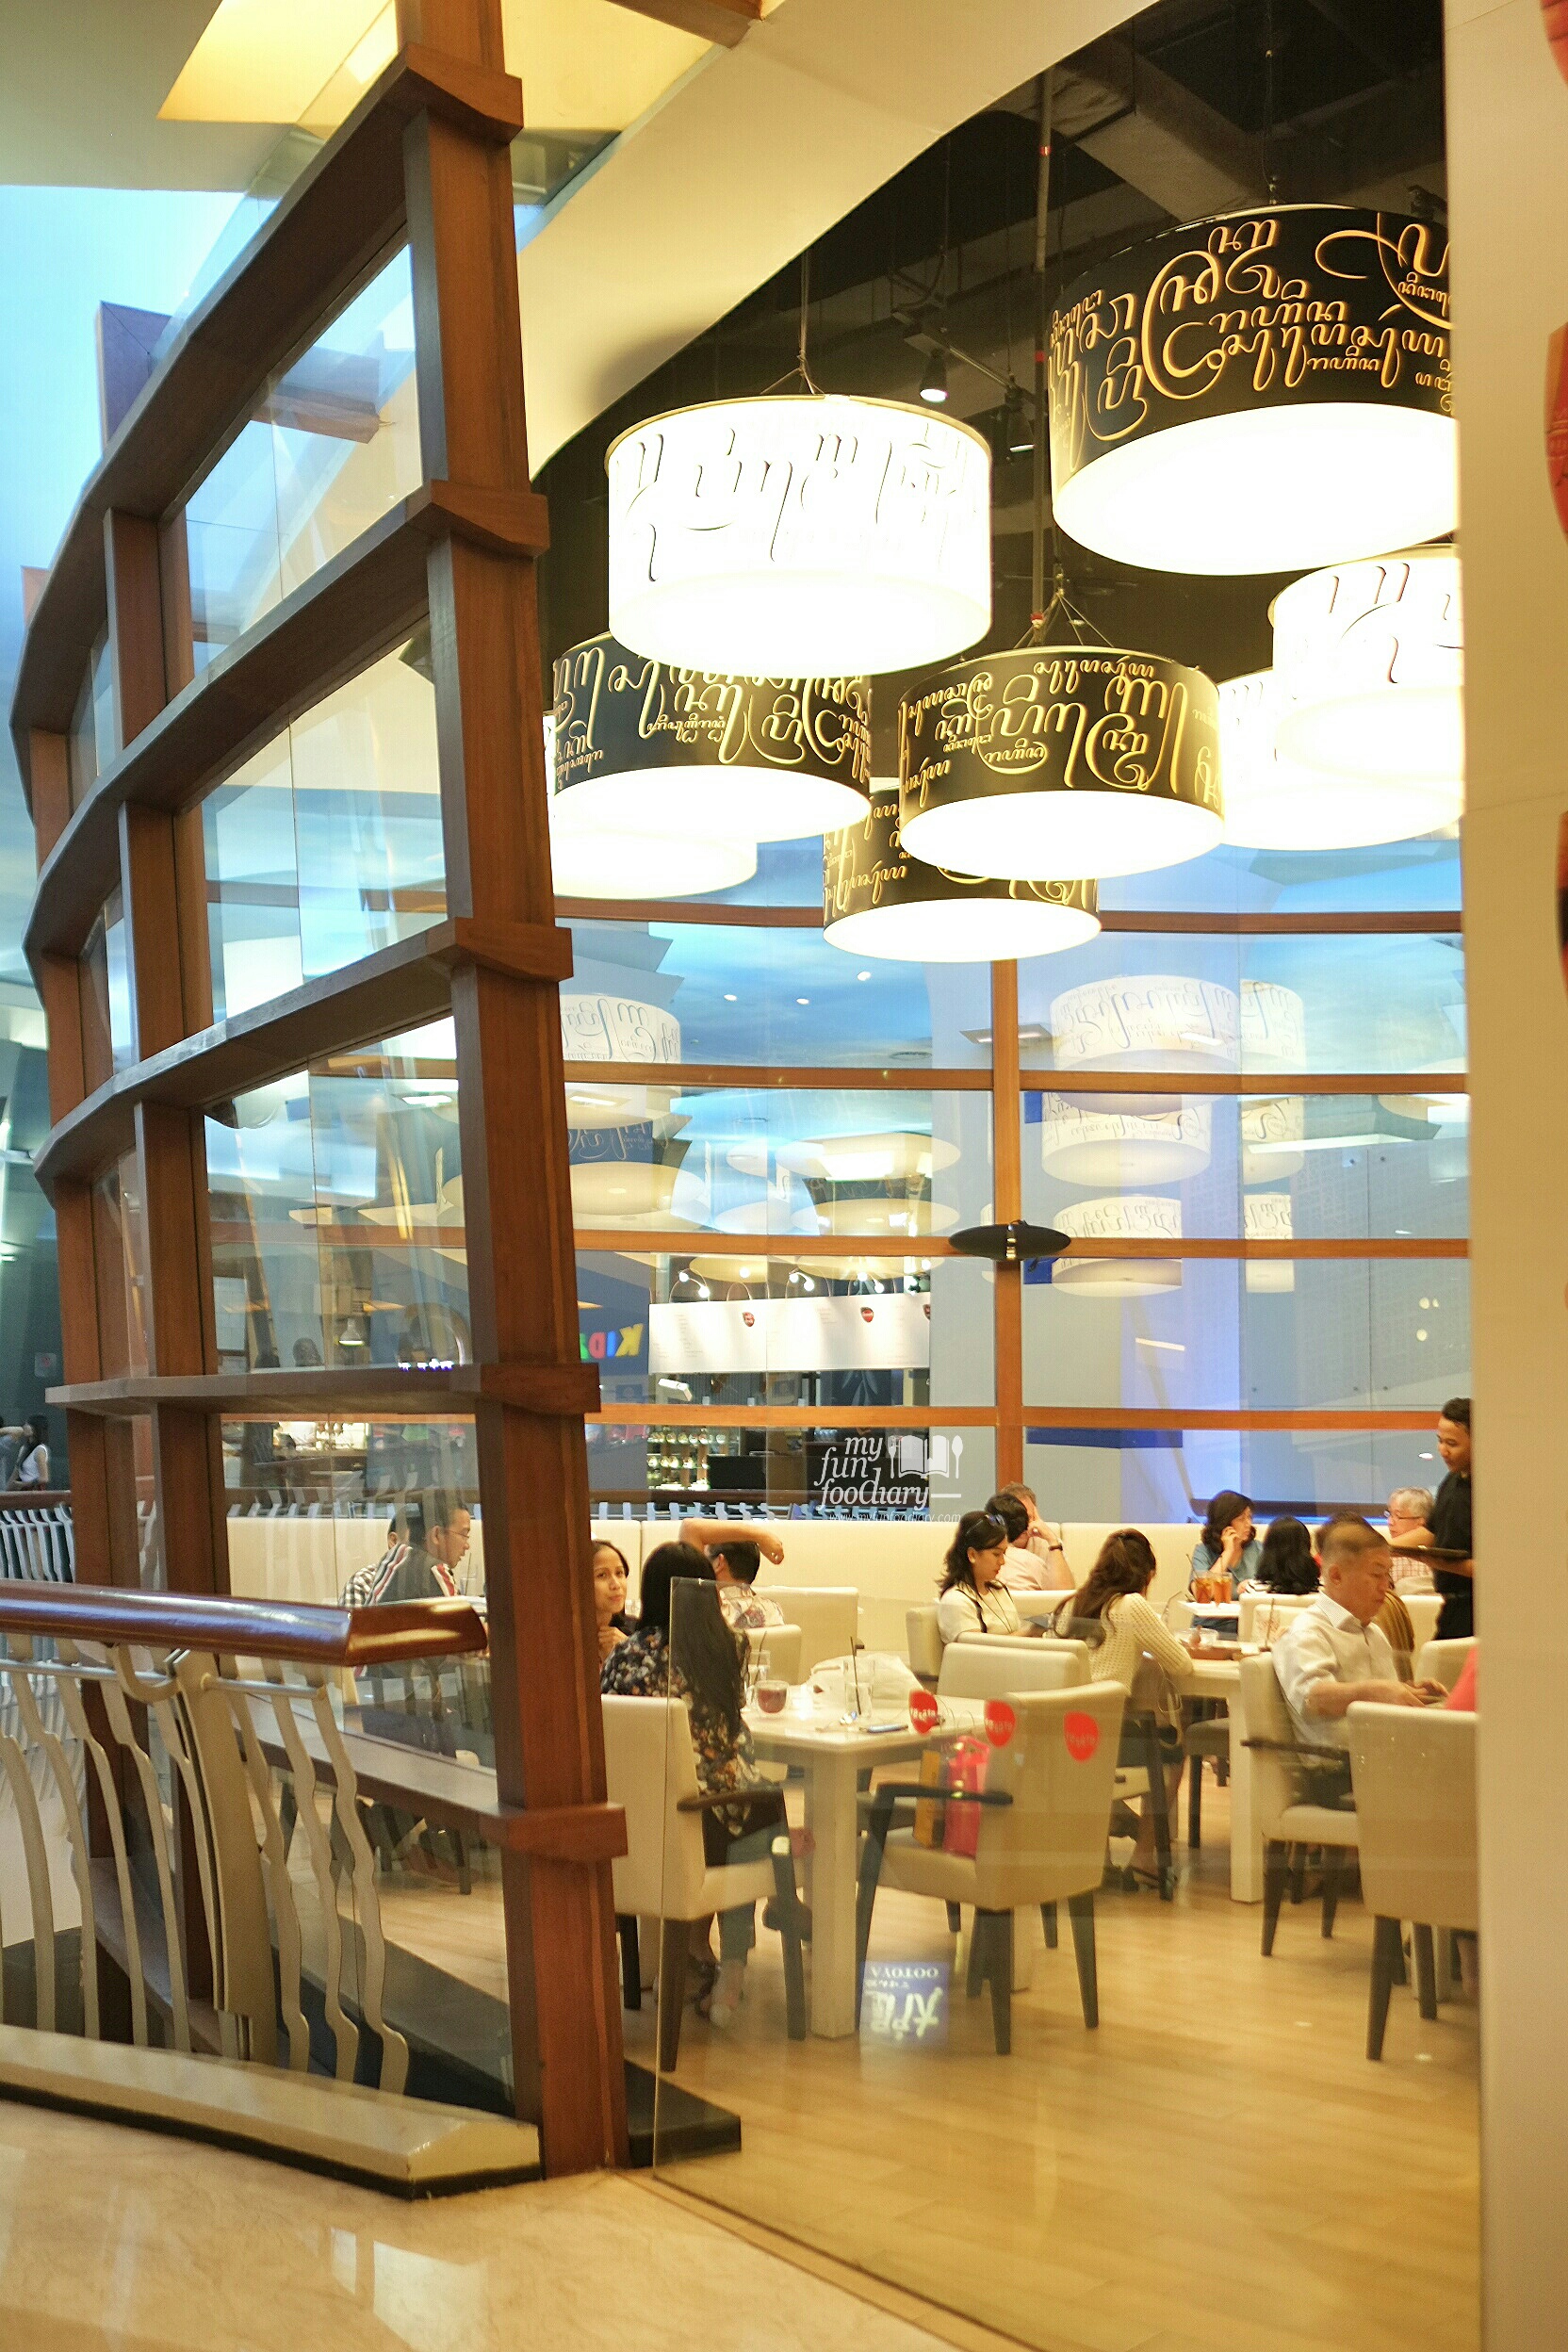 Cozy Ambiance at Tesate Pacific Place by Myfunfoodiary